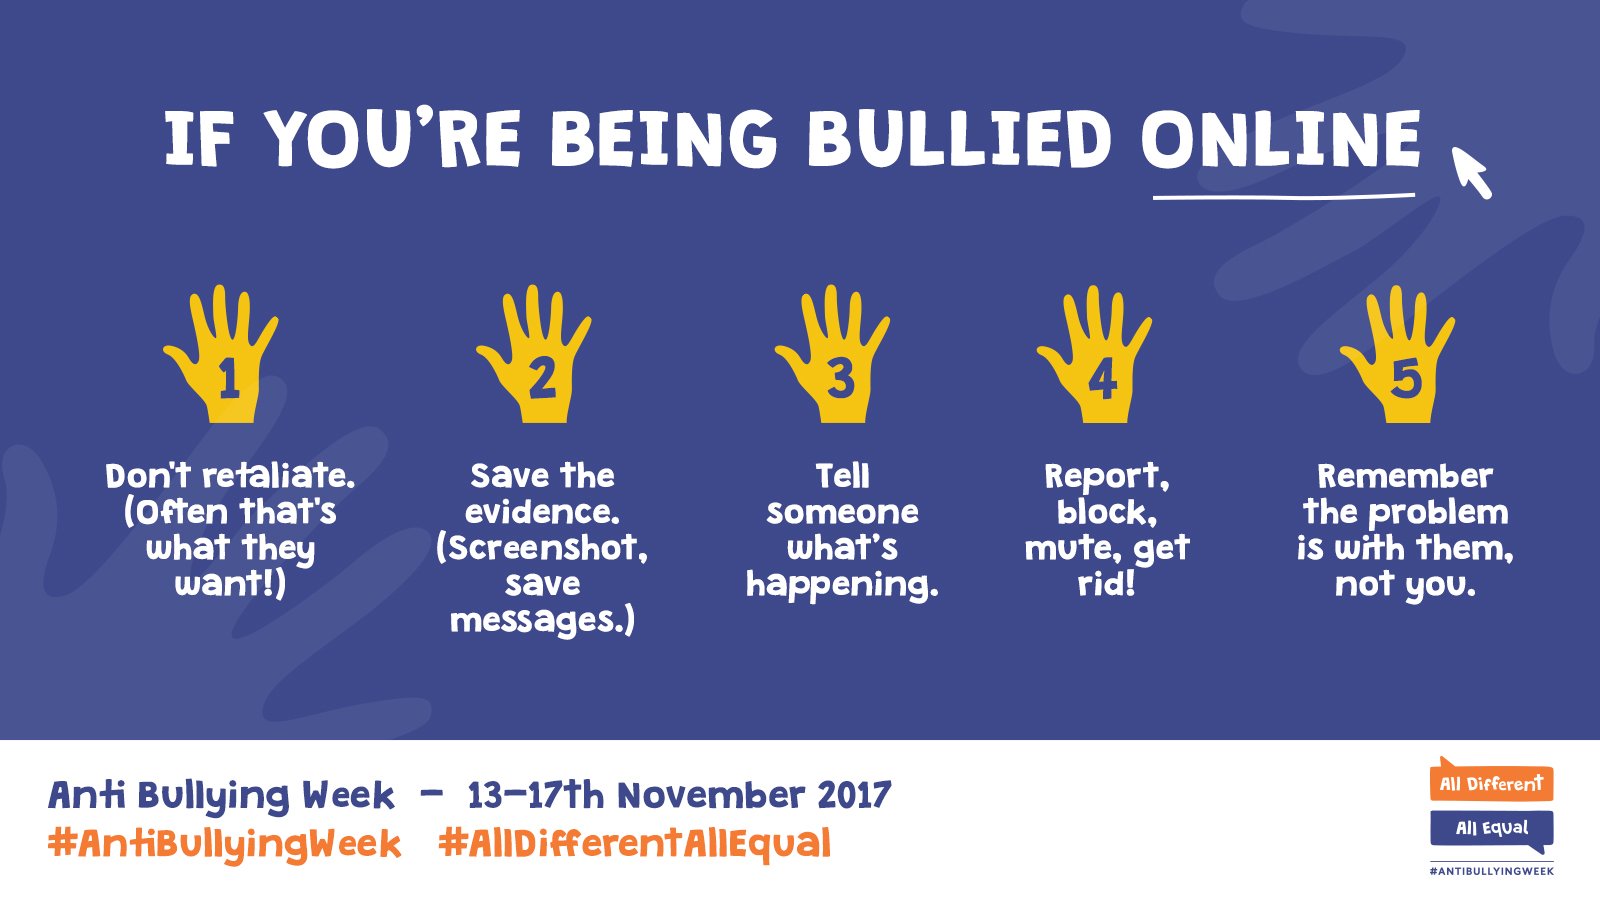 Preventing Cyberbullying - Top Ten Tips for Parents